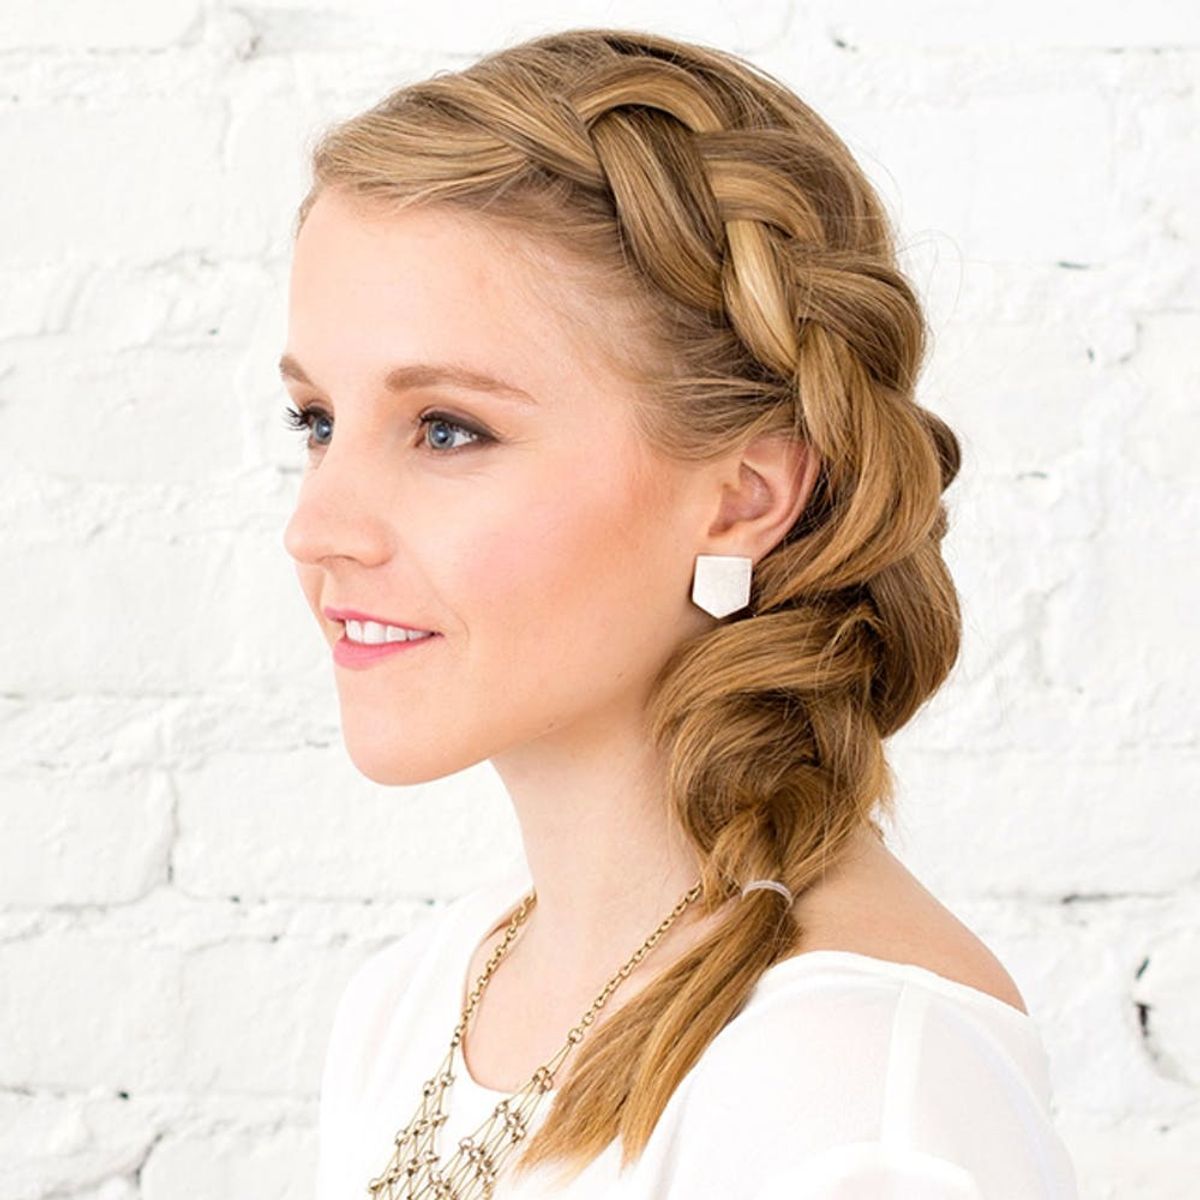 How to Master Khaleesi’s Best Braid in Only 4 Steps